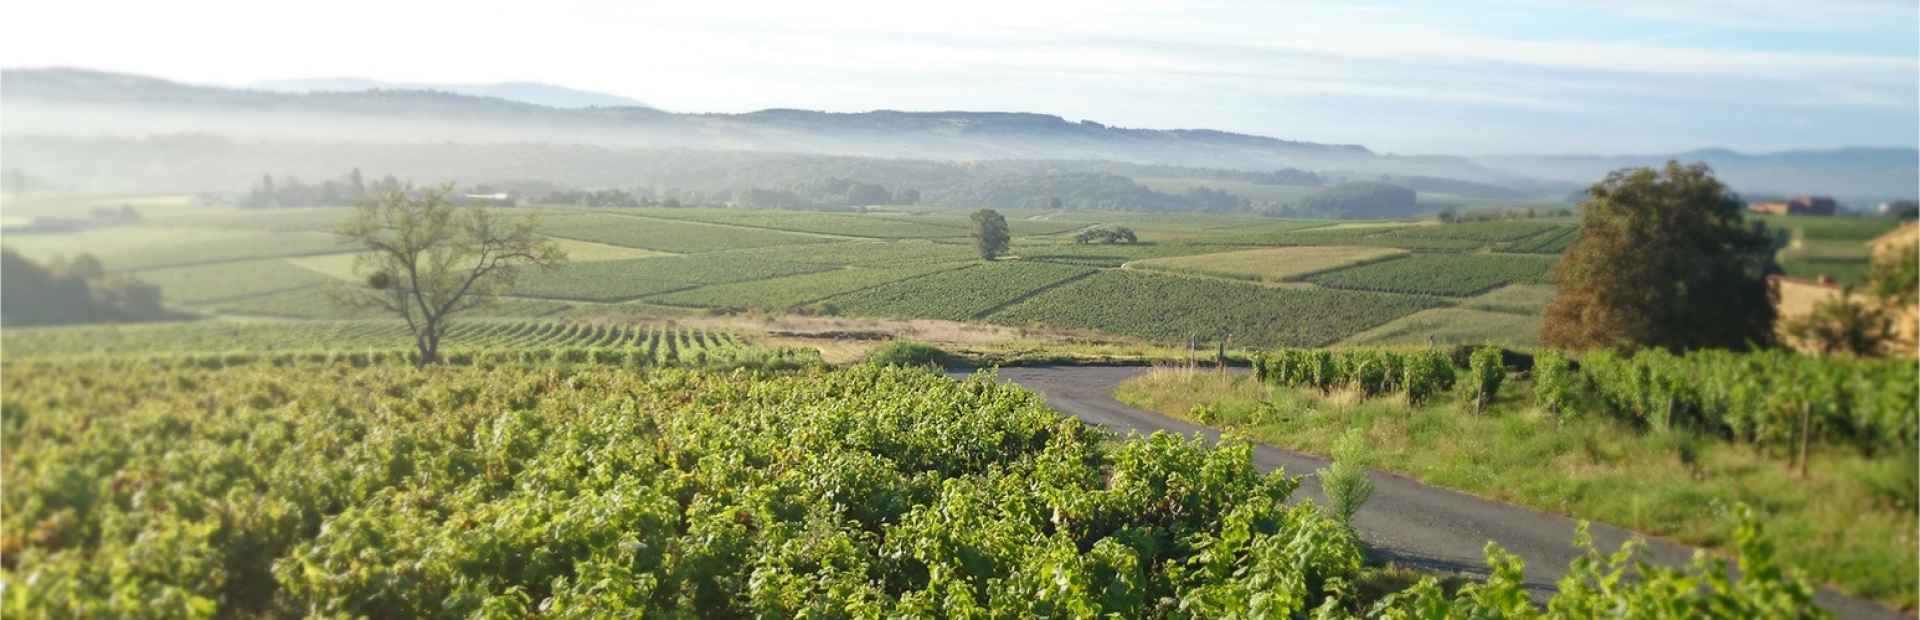 Winesof the appellation Fleurie